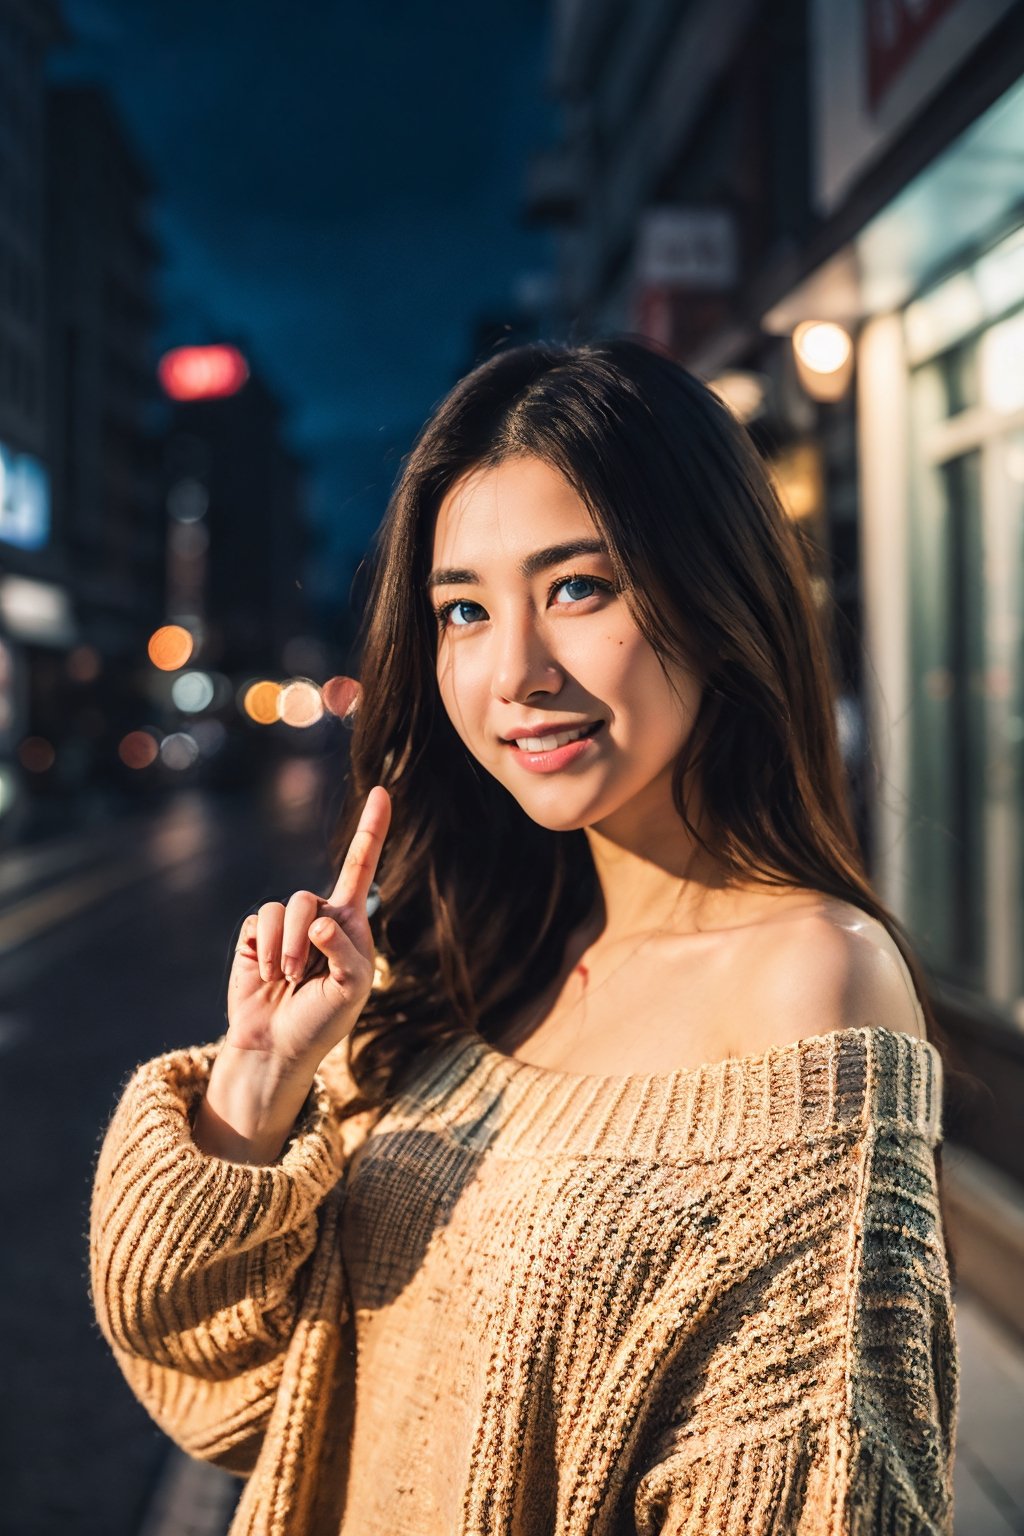 film photo, low Resolution, street snap, subsurface scattering, Rembrandt lighting, details skin texture, look at far, Depth of field, city street background, lovely Japanese girl,Deep v sweater,short short,night, perfect finger,smile,silm finger,
